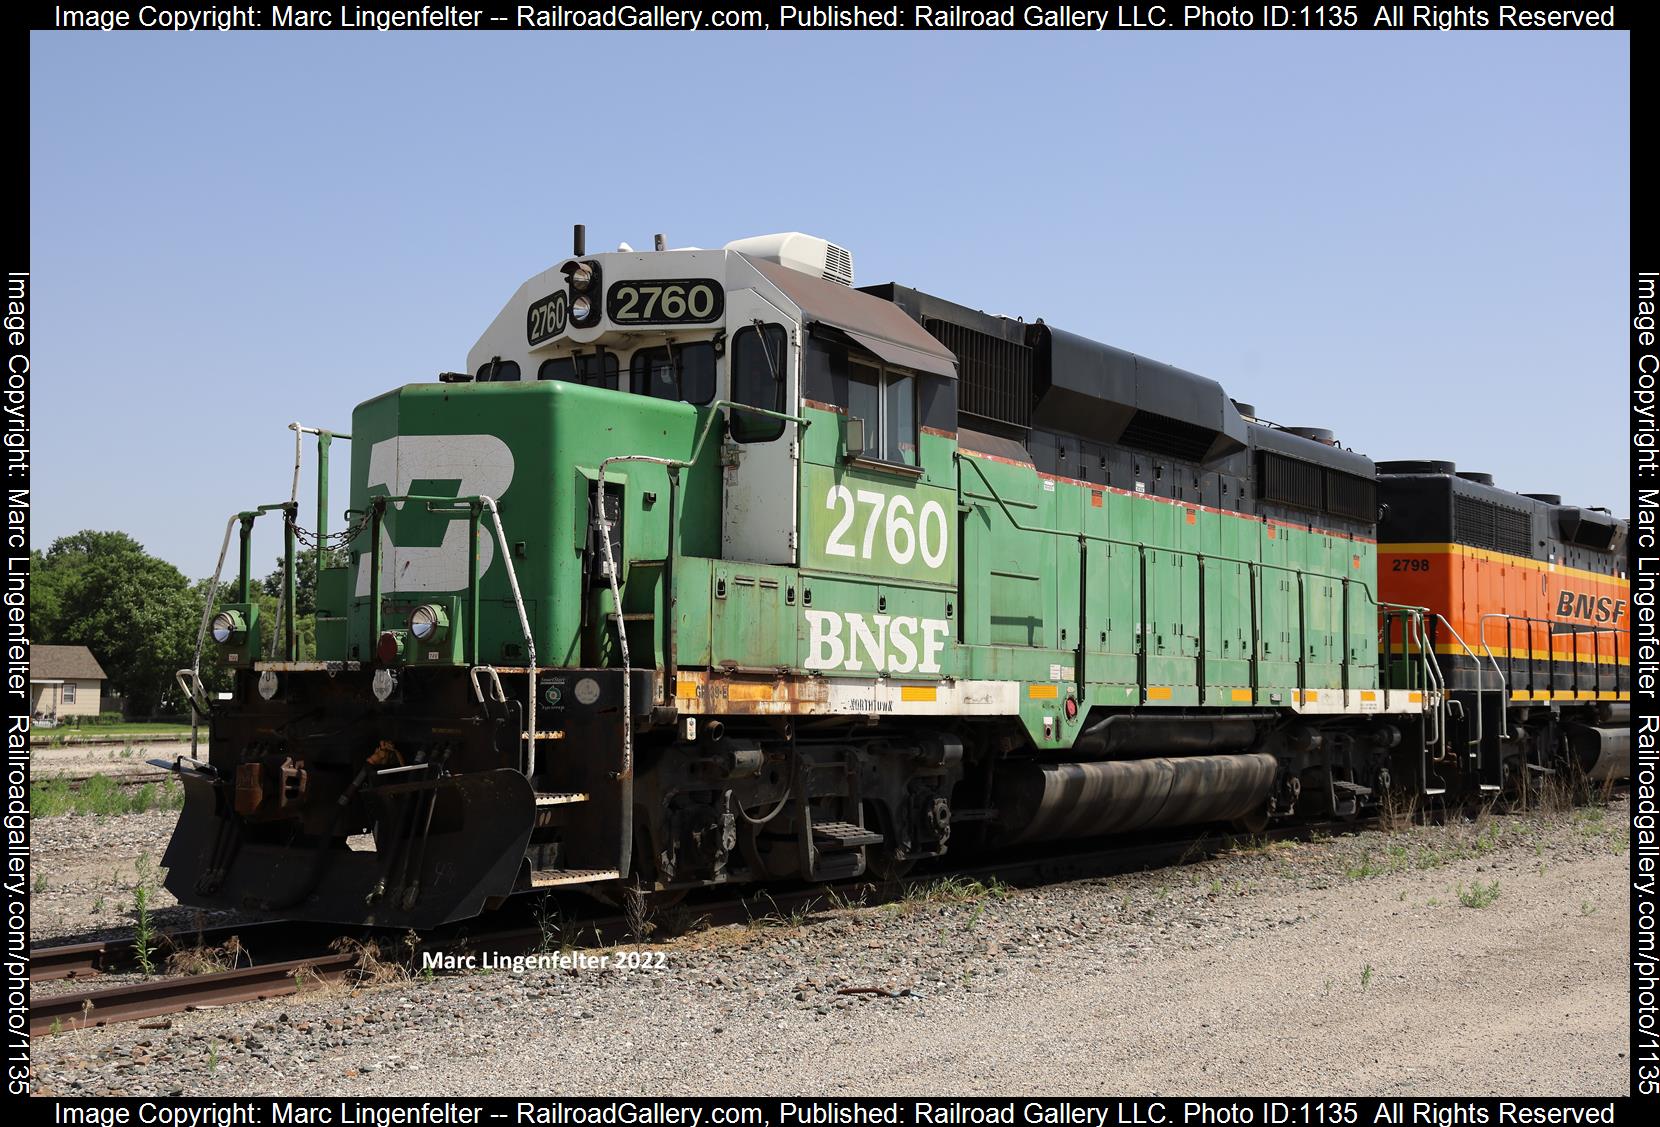 BNSF 2760 is a class EMD GP39E and  is pictured in Newton, Kansas, USA.  This was taken along the Unknown on the BNSF Railway. Photo Copyright: Marc Lingenfelter uploaded to Railroad Gallery on 06/13/2023. This photograph of BNSF 2760 was taken on Tuesday, June 14, 2022. All Rights Reserved. 